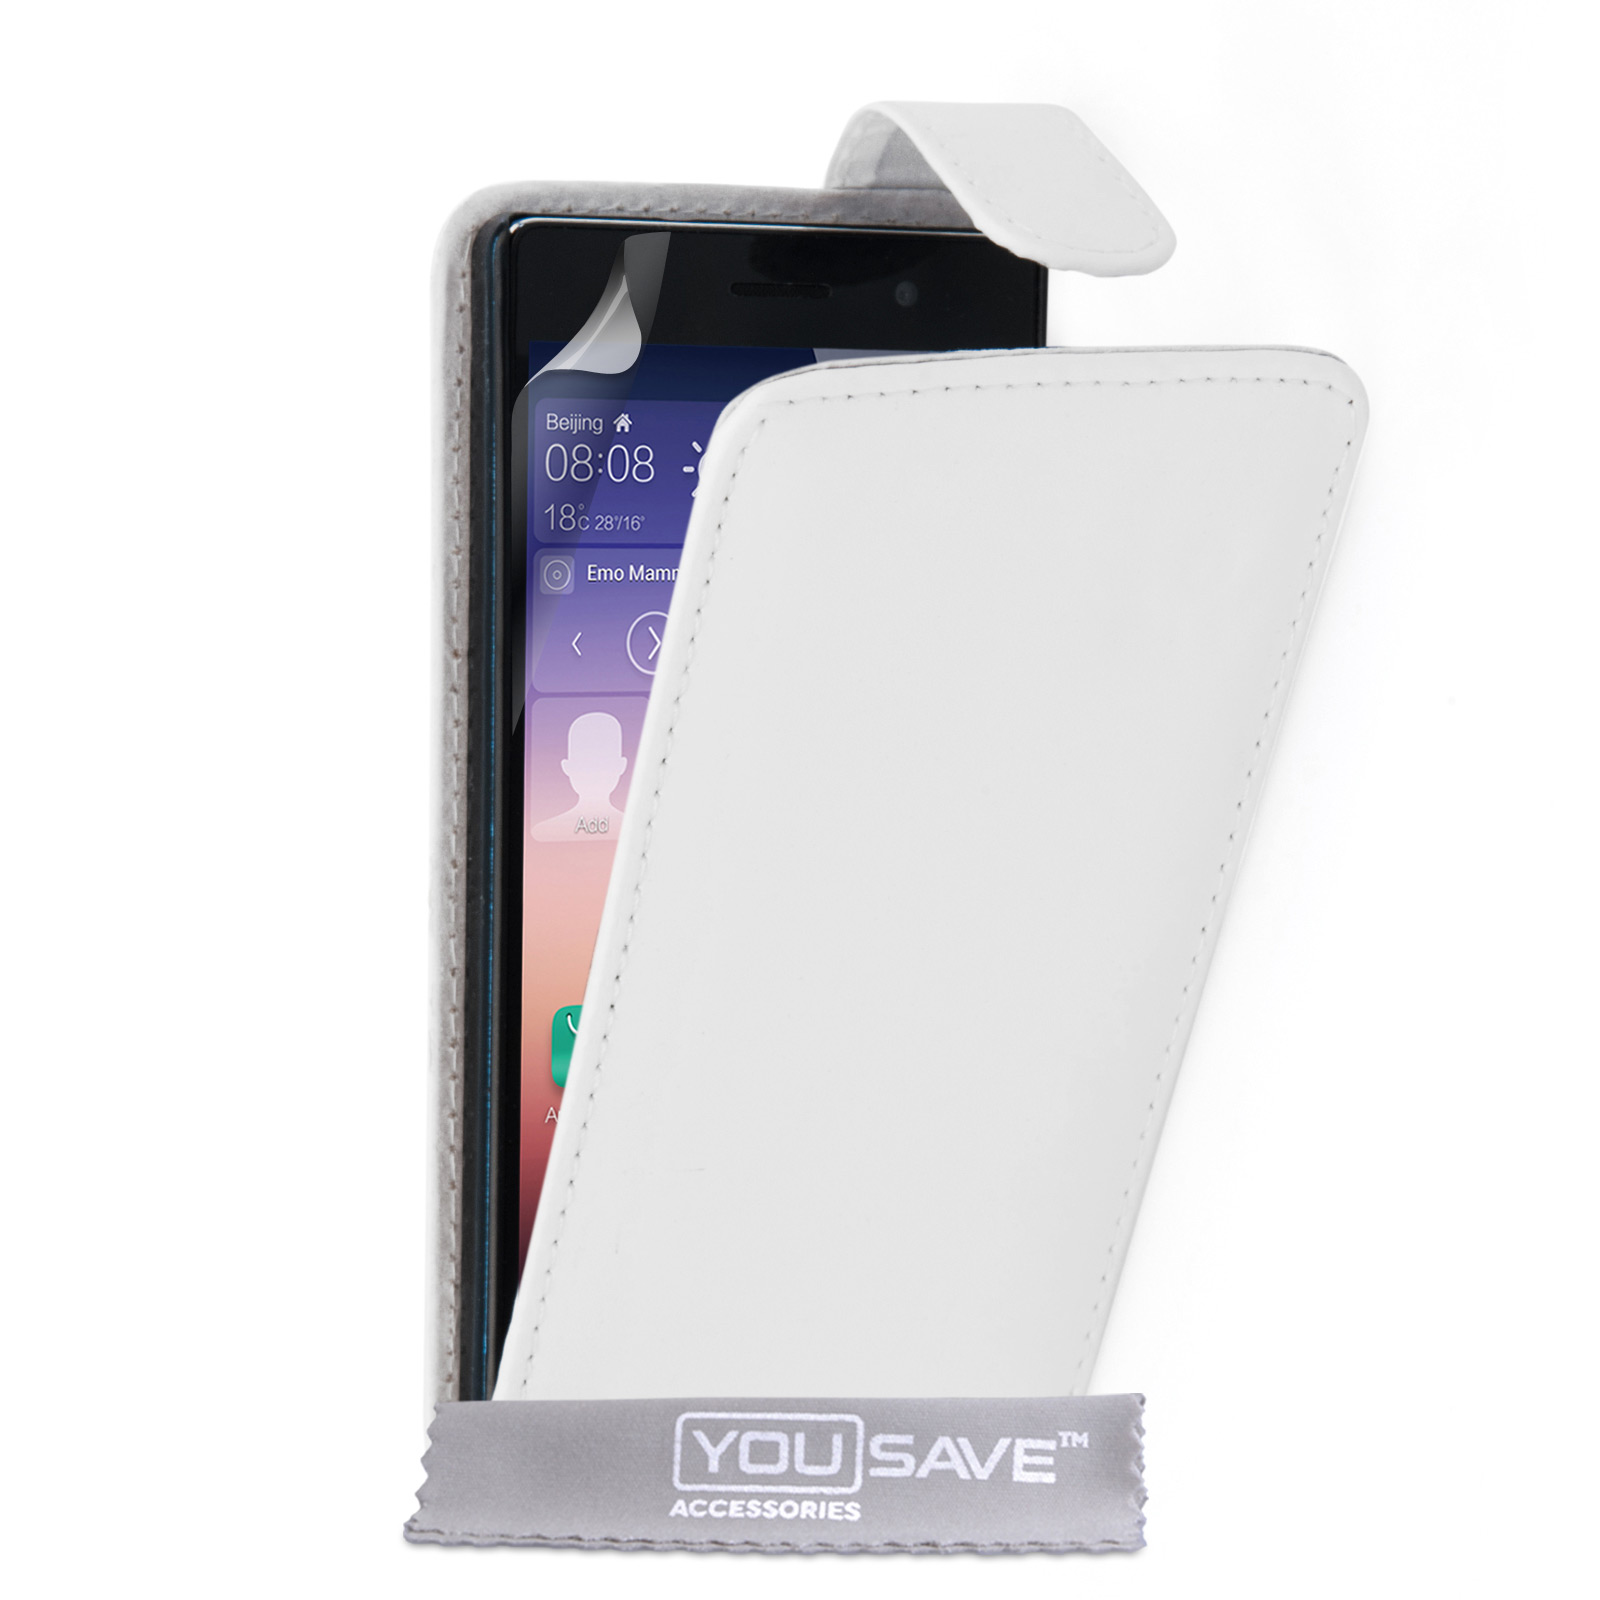 YouSave Accessories Huawei Ascend P7 Leather-Effect Flip Case - White